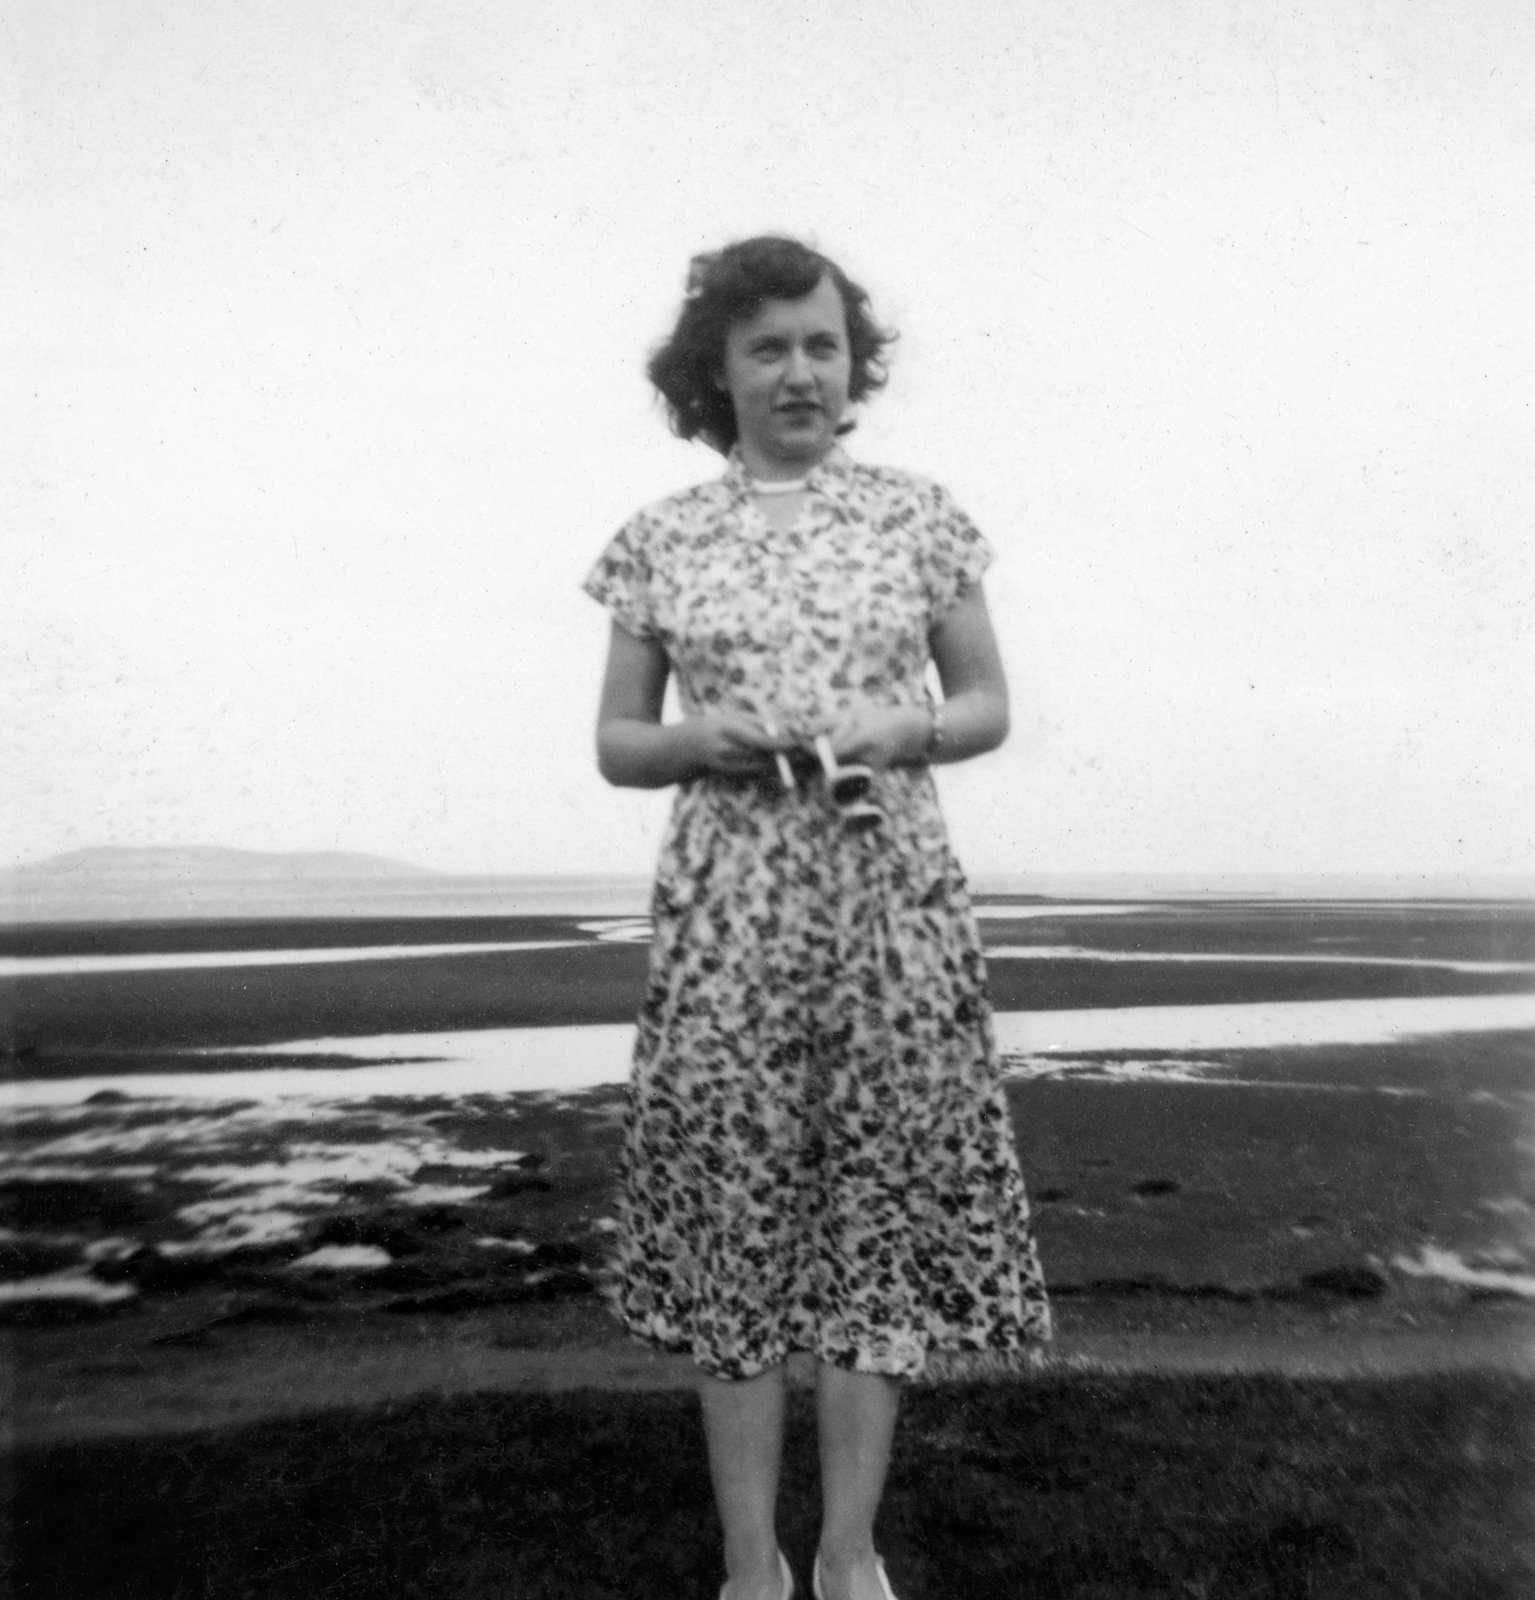 Pam on The Strand, Malahide – preparing to depart for Canada,